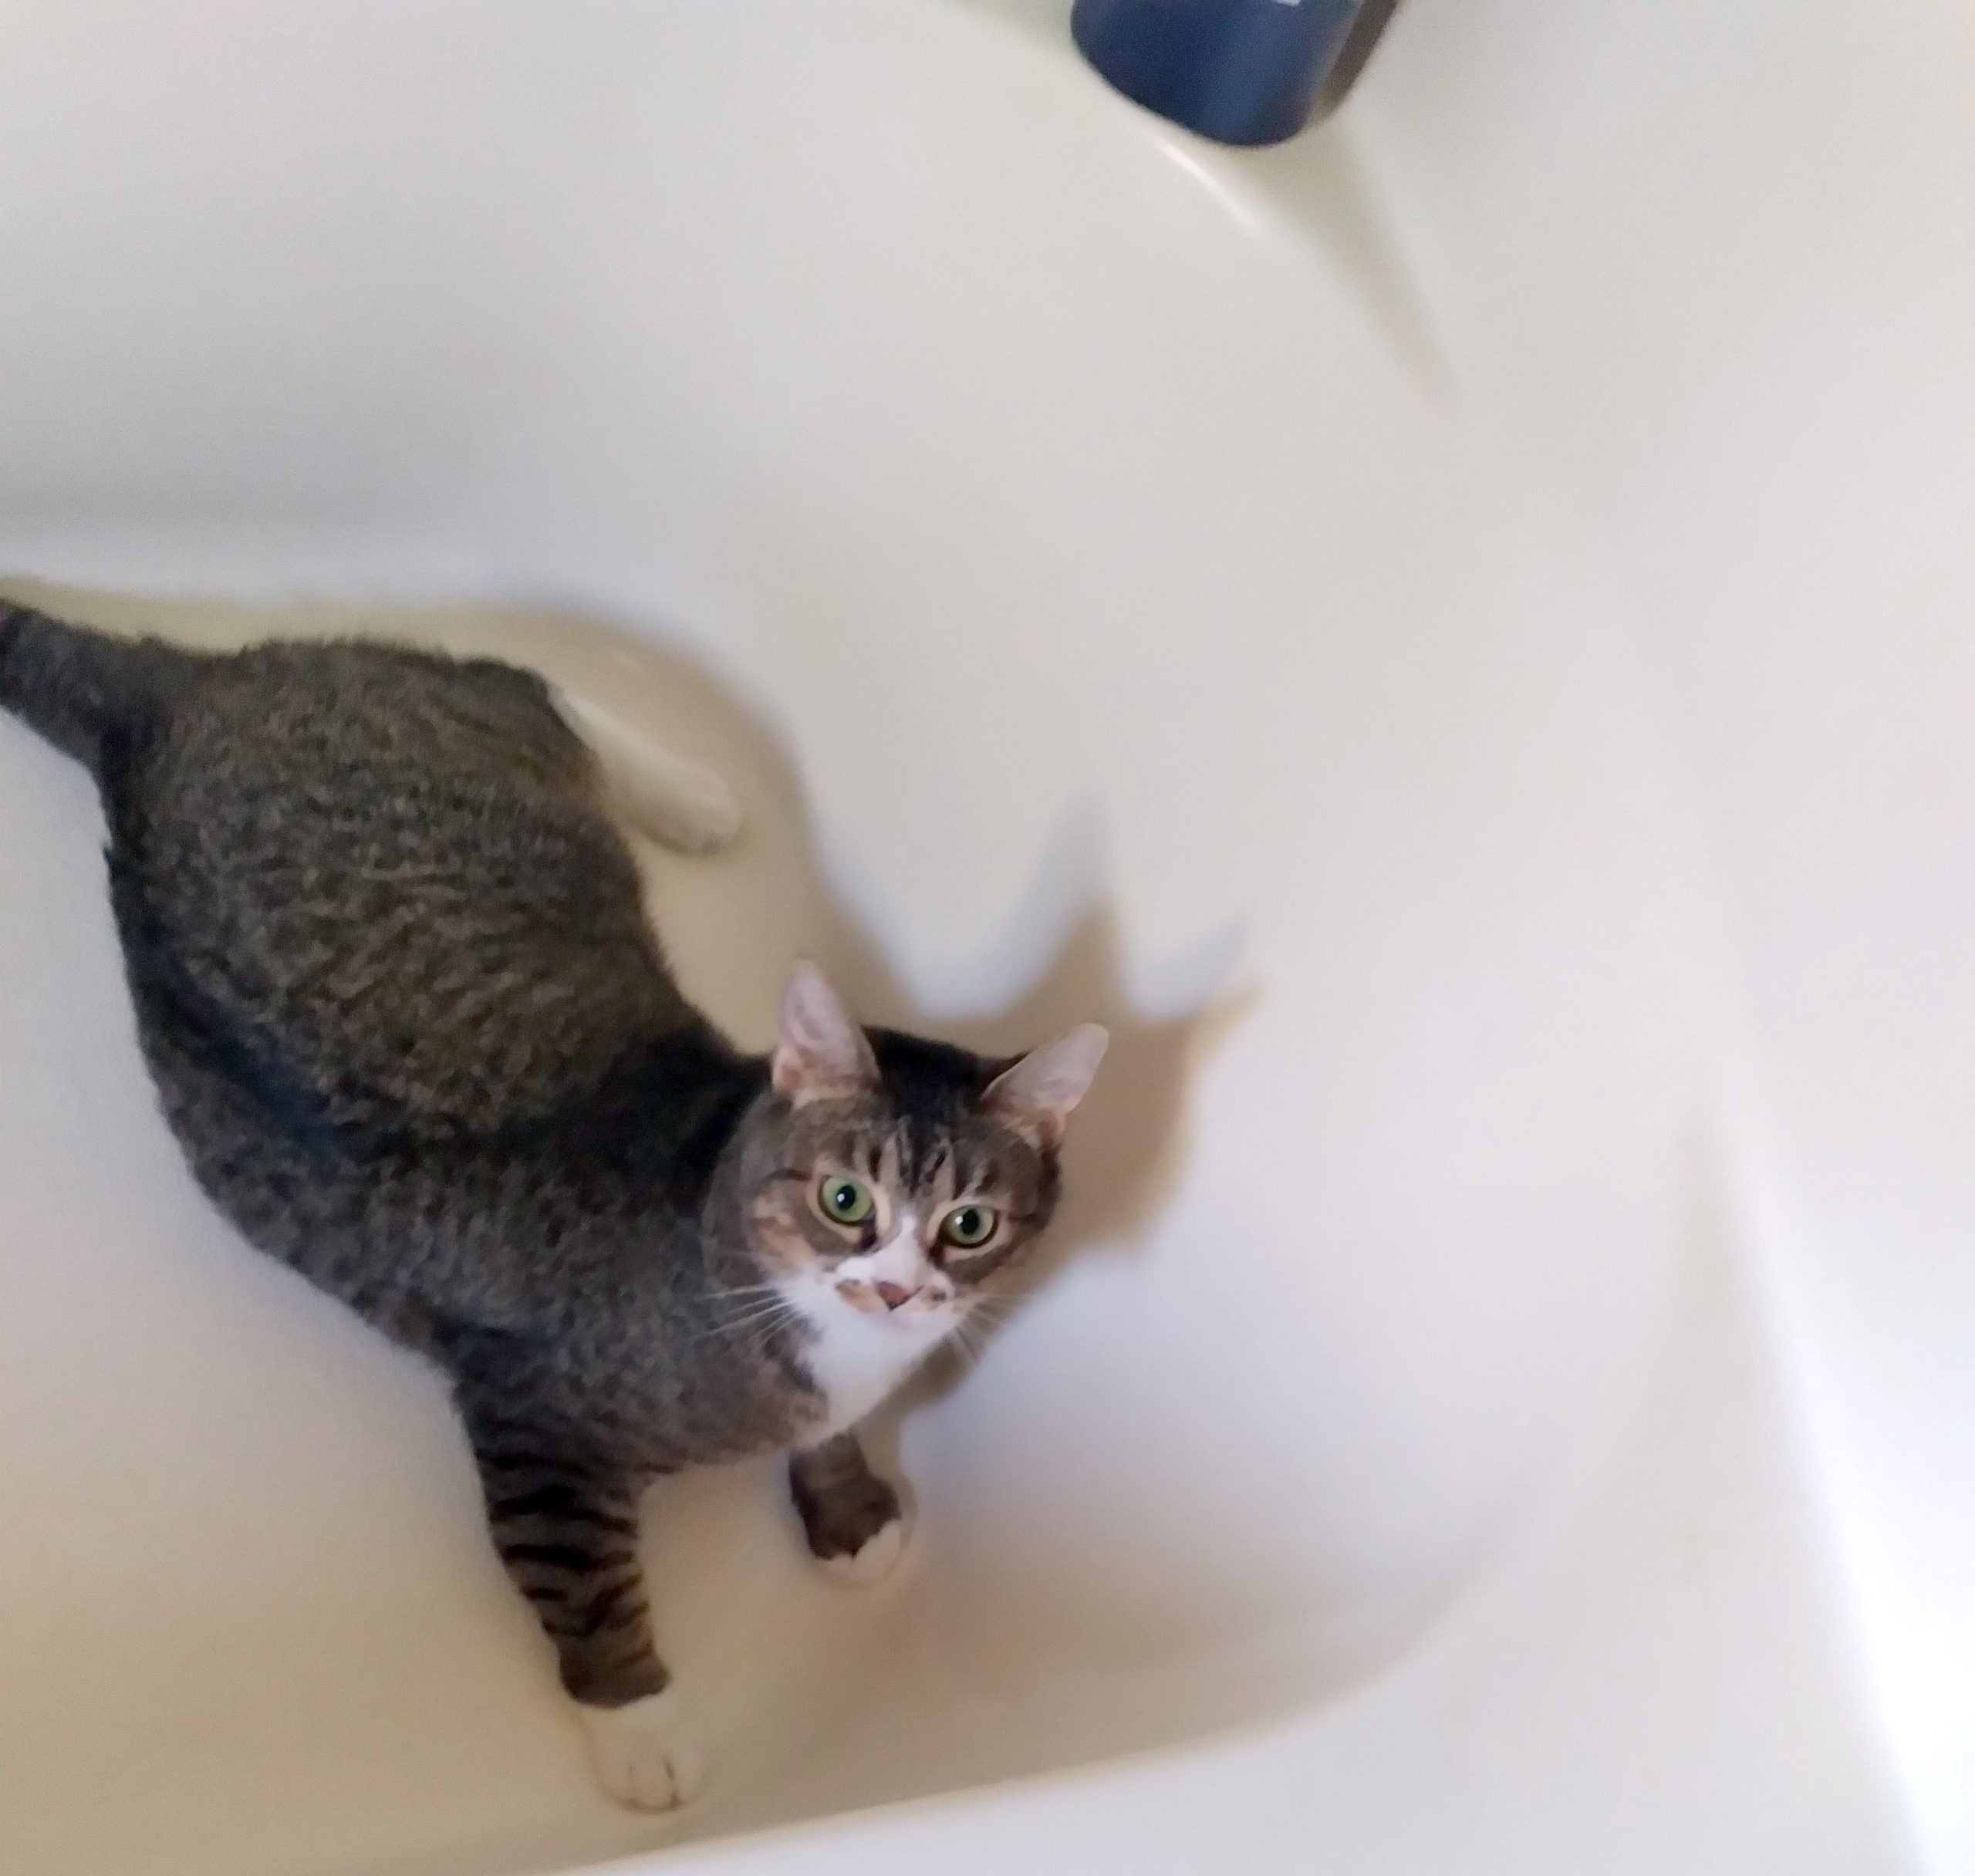 Tabby cat looks up at camera from tub